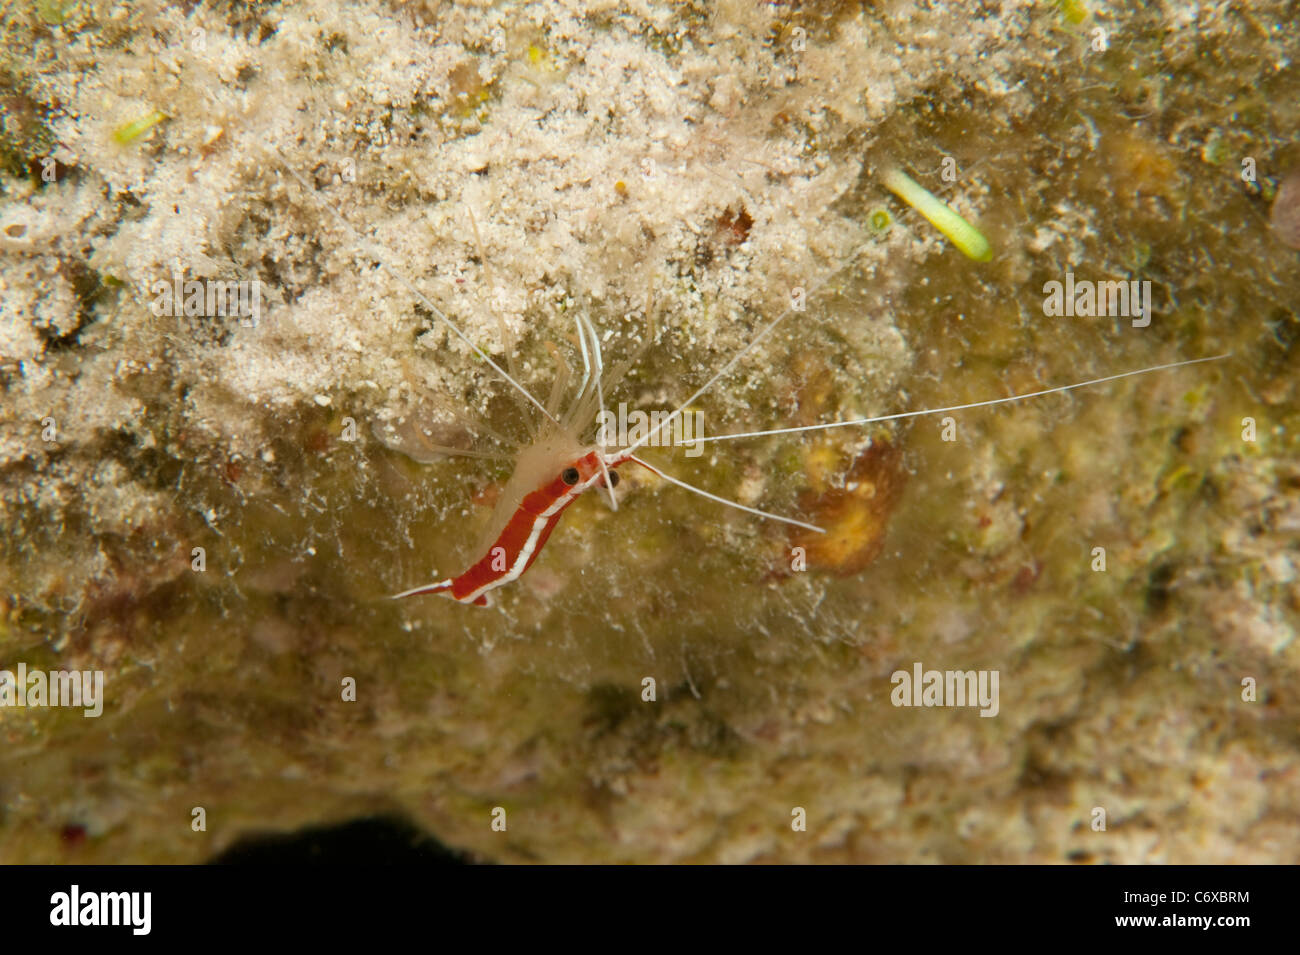 A Scarlet-striped Cleaning Shrimp on some coral in Belize. Stock Photo